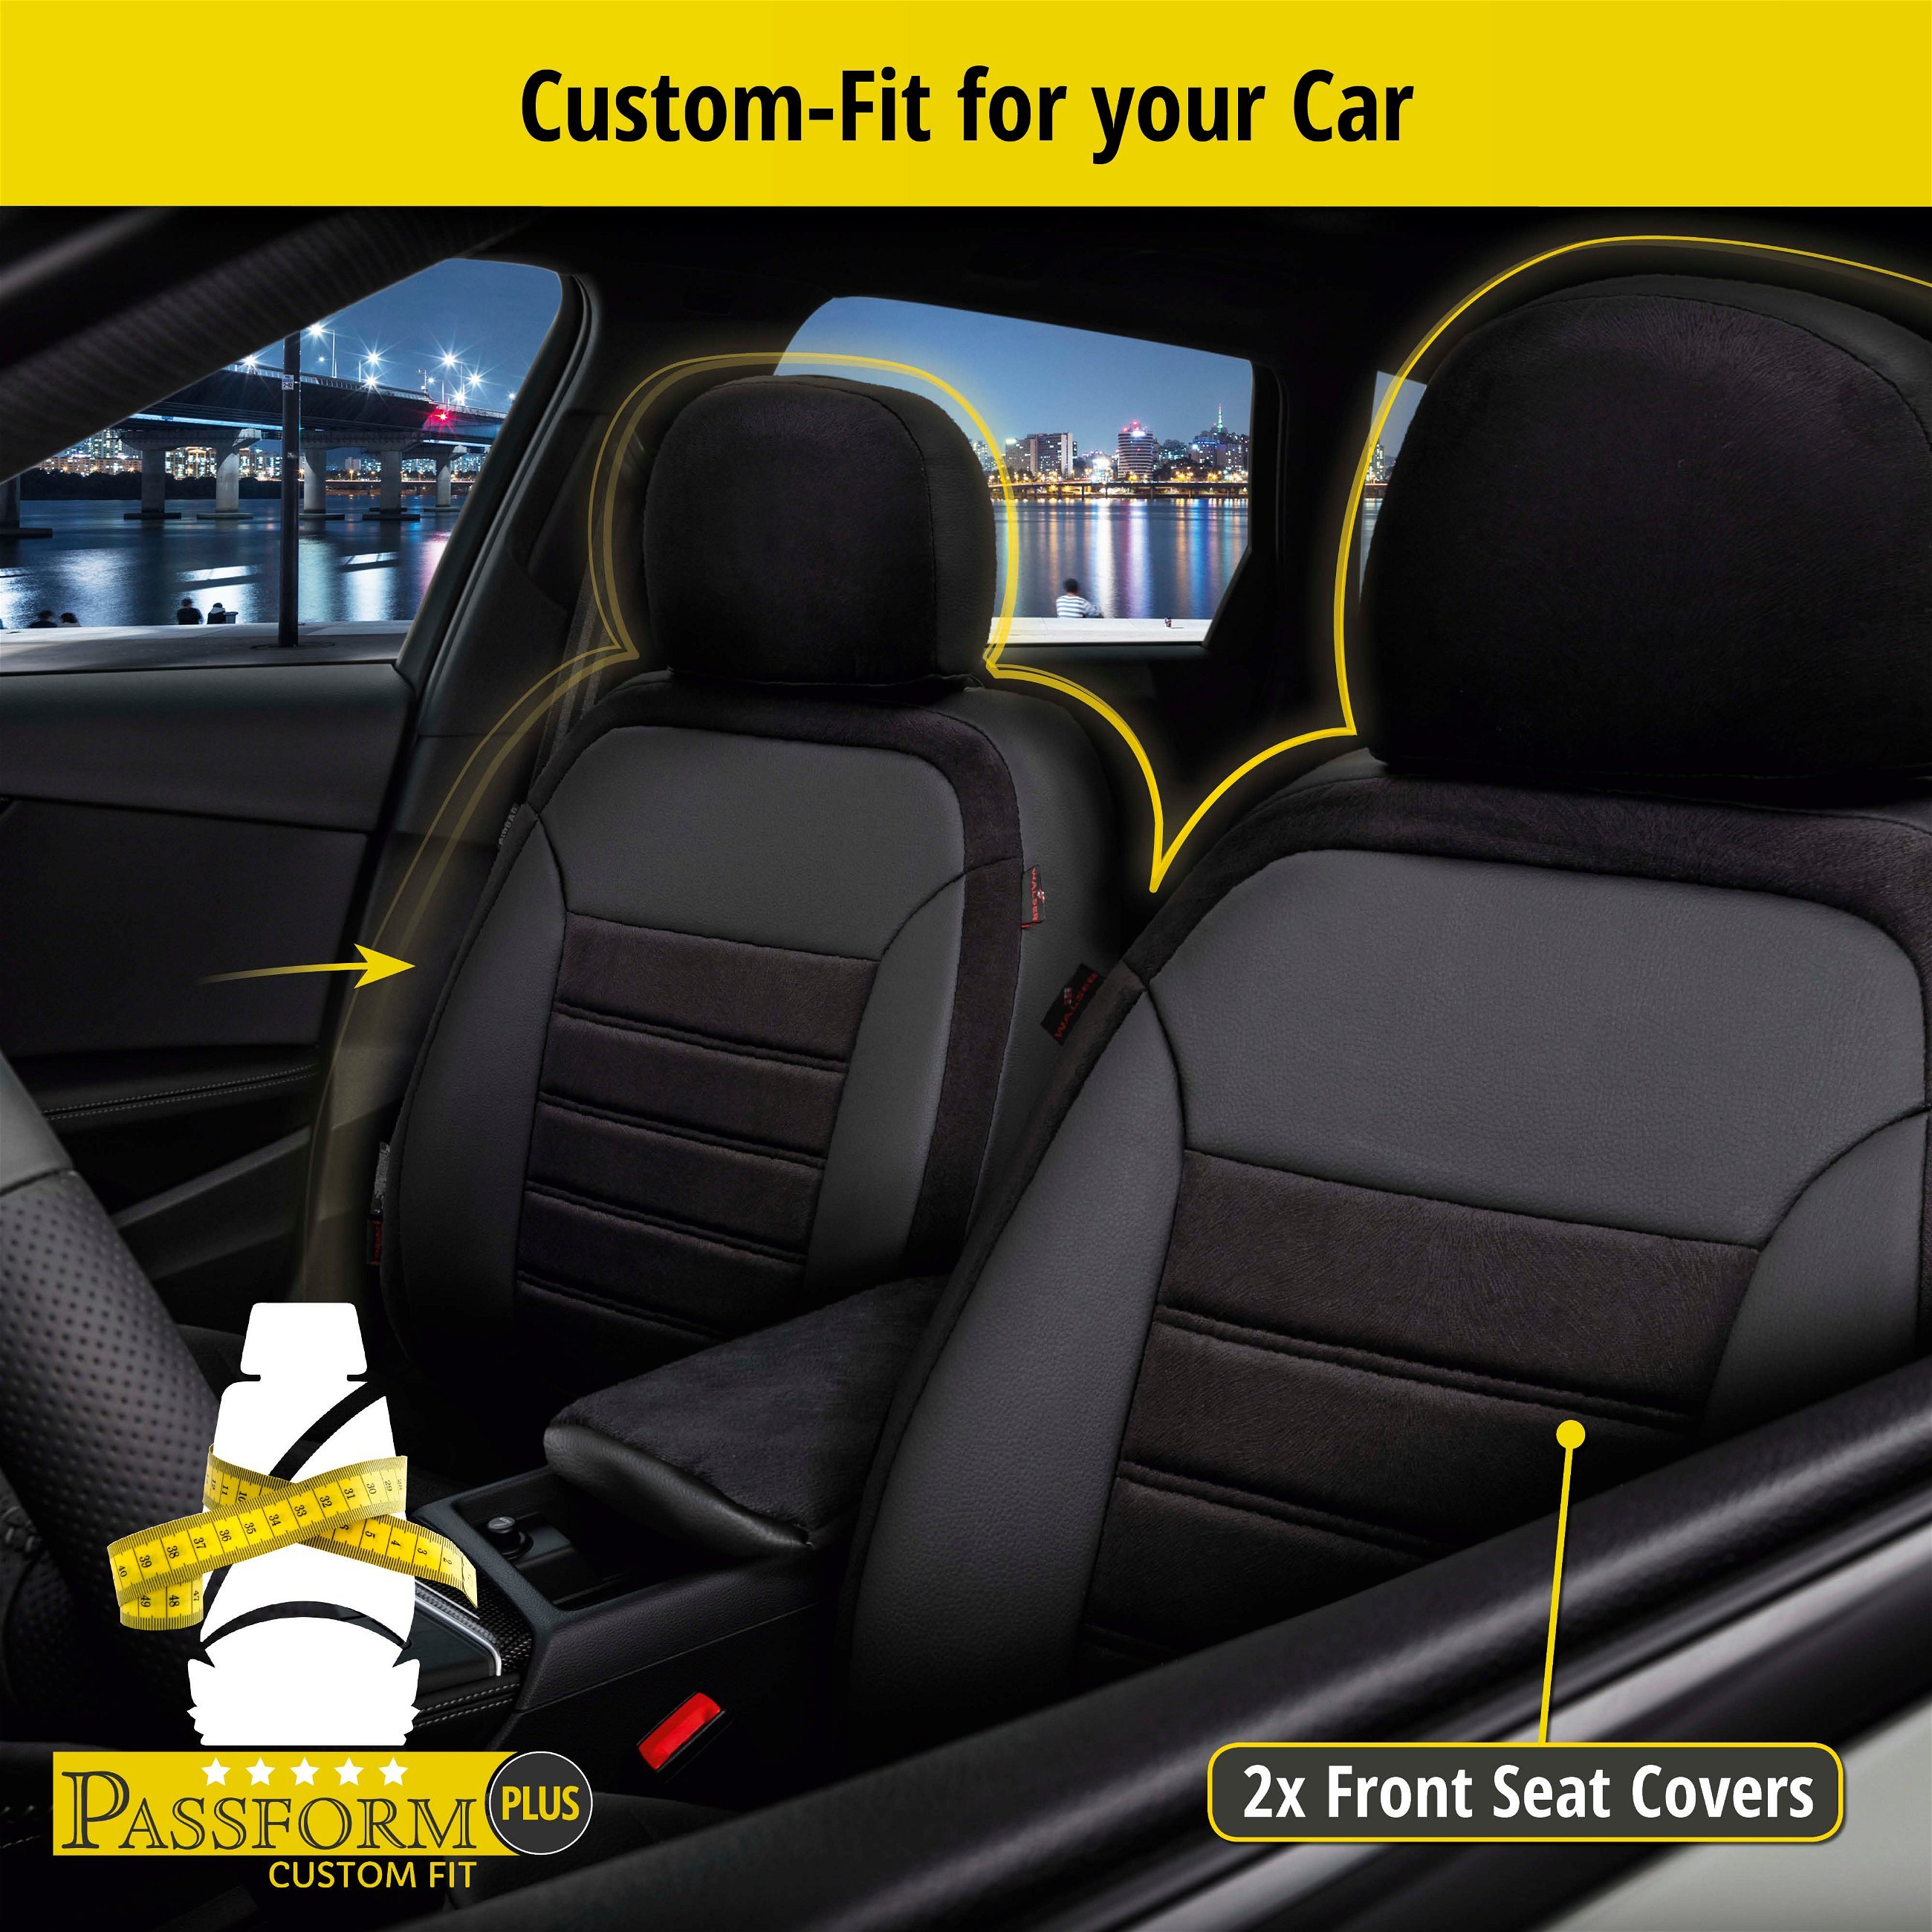 Seat Cover Bari for Fiat 500 (312) 07/2007-Today, 2 seat covers for normal seats